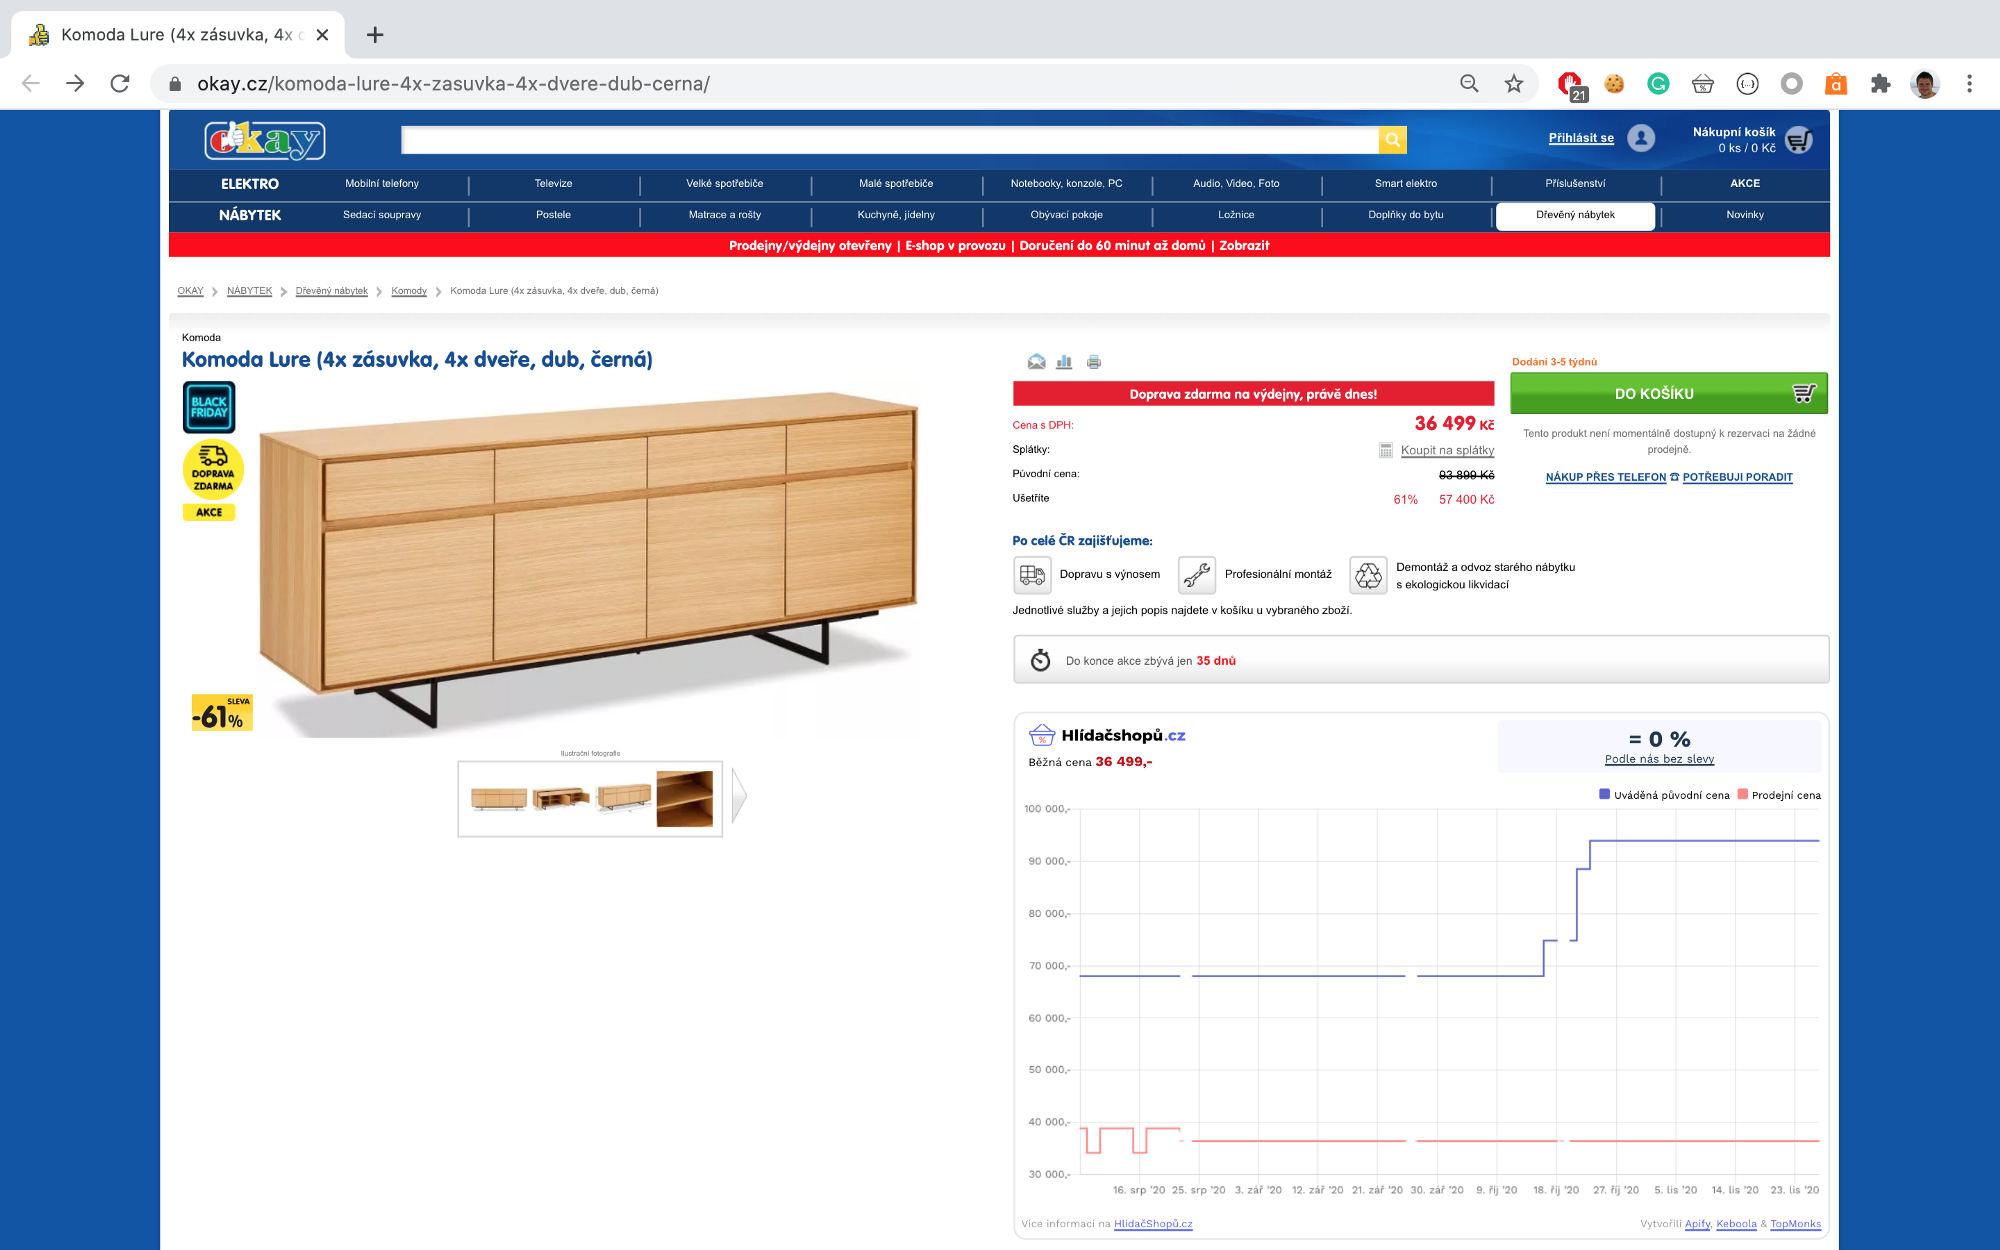 screenshot of a chest of drawers on sale at okay.cz from 93,800 CZK to 36,499 CZK